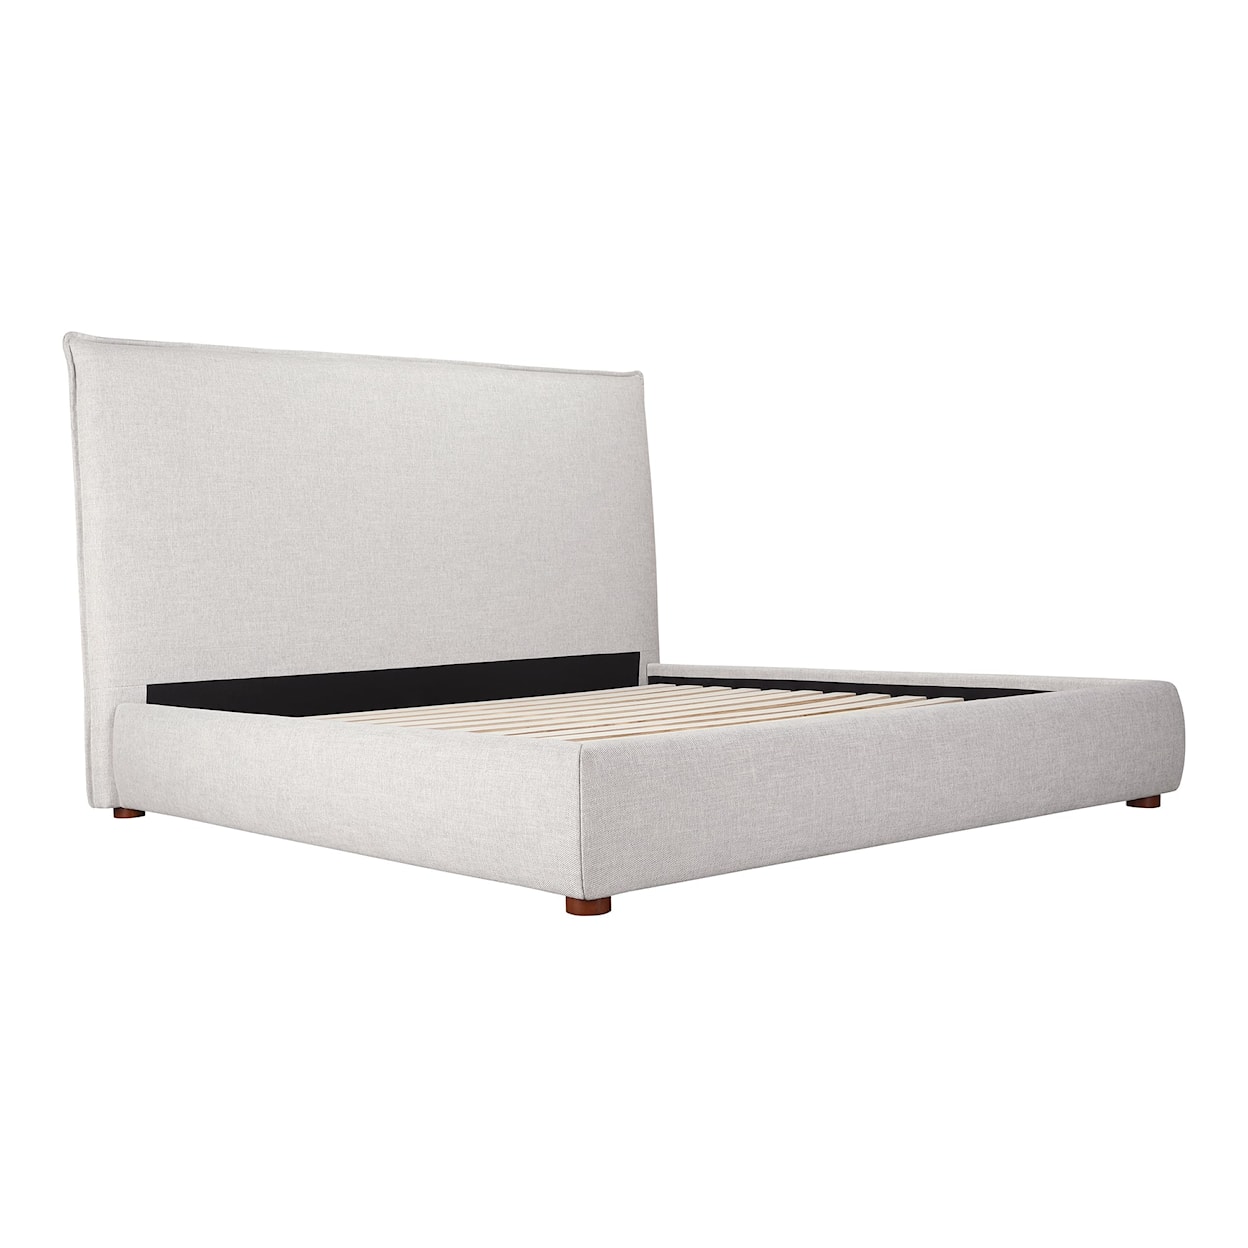 Moe's Home Collection Luzon Upholstered Queen Bed